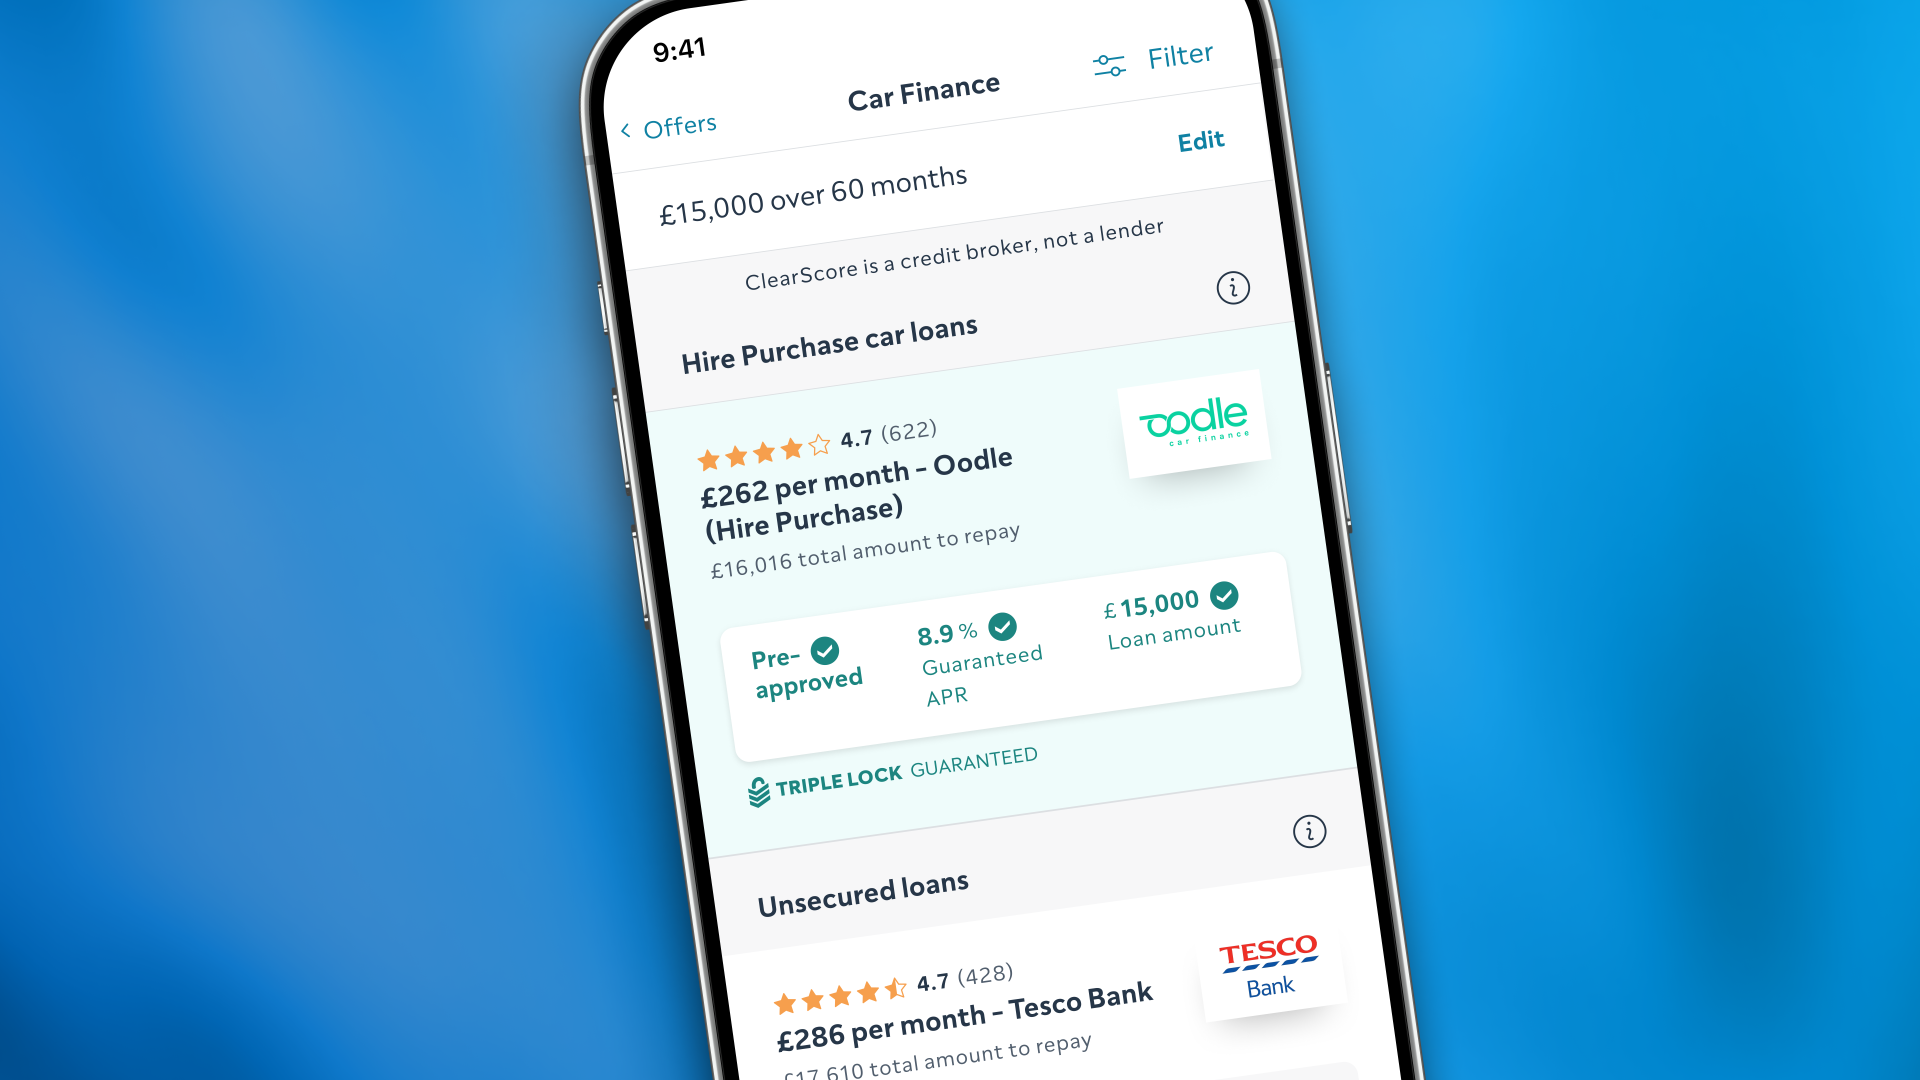 Some of the car finance offers available on ClearScore